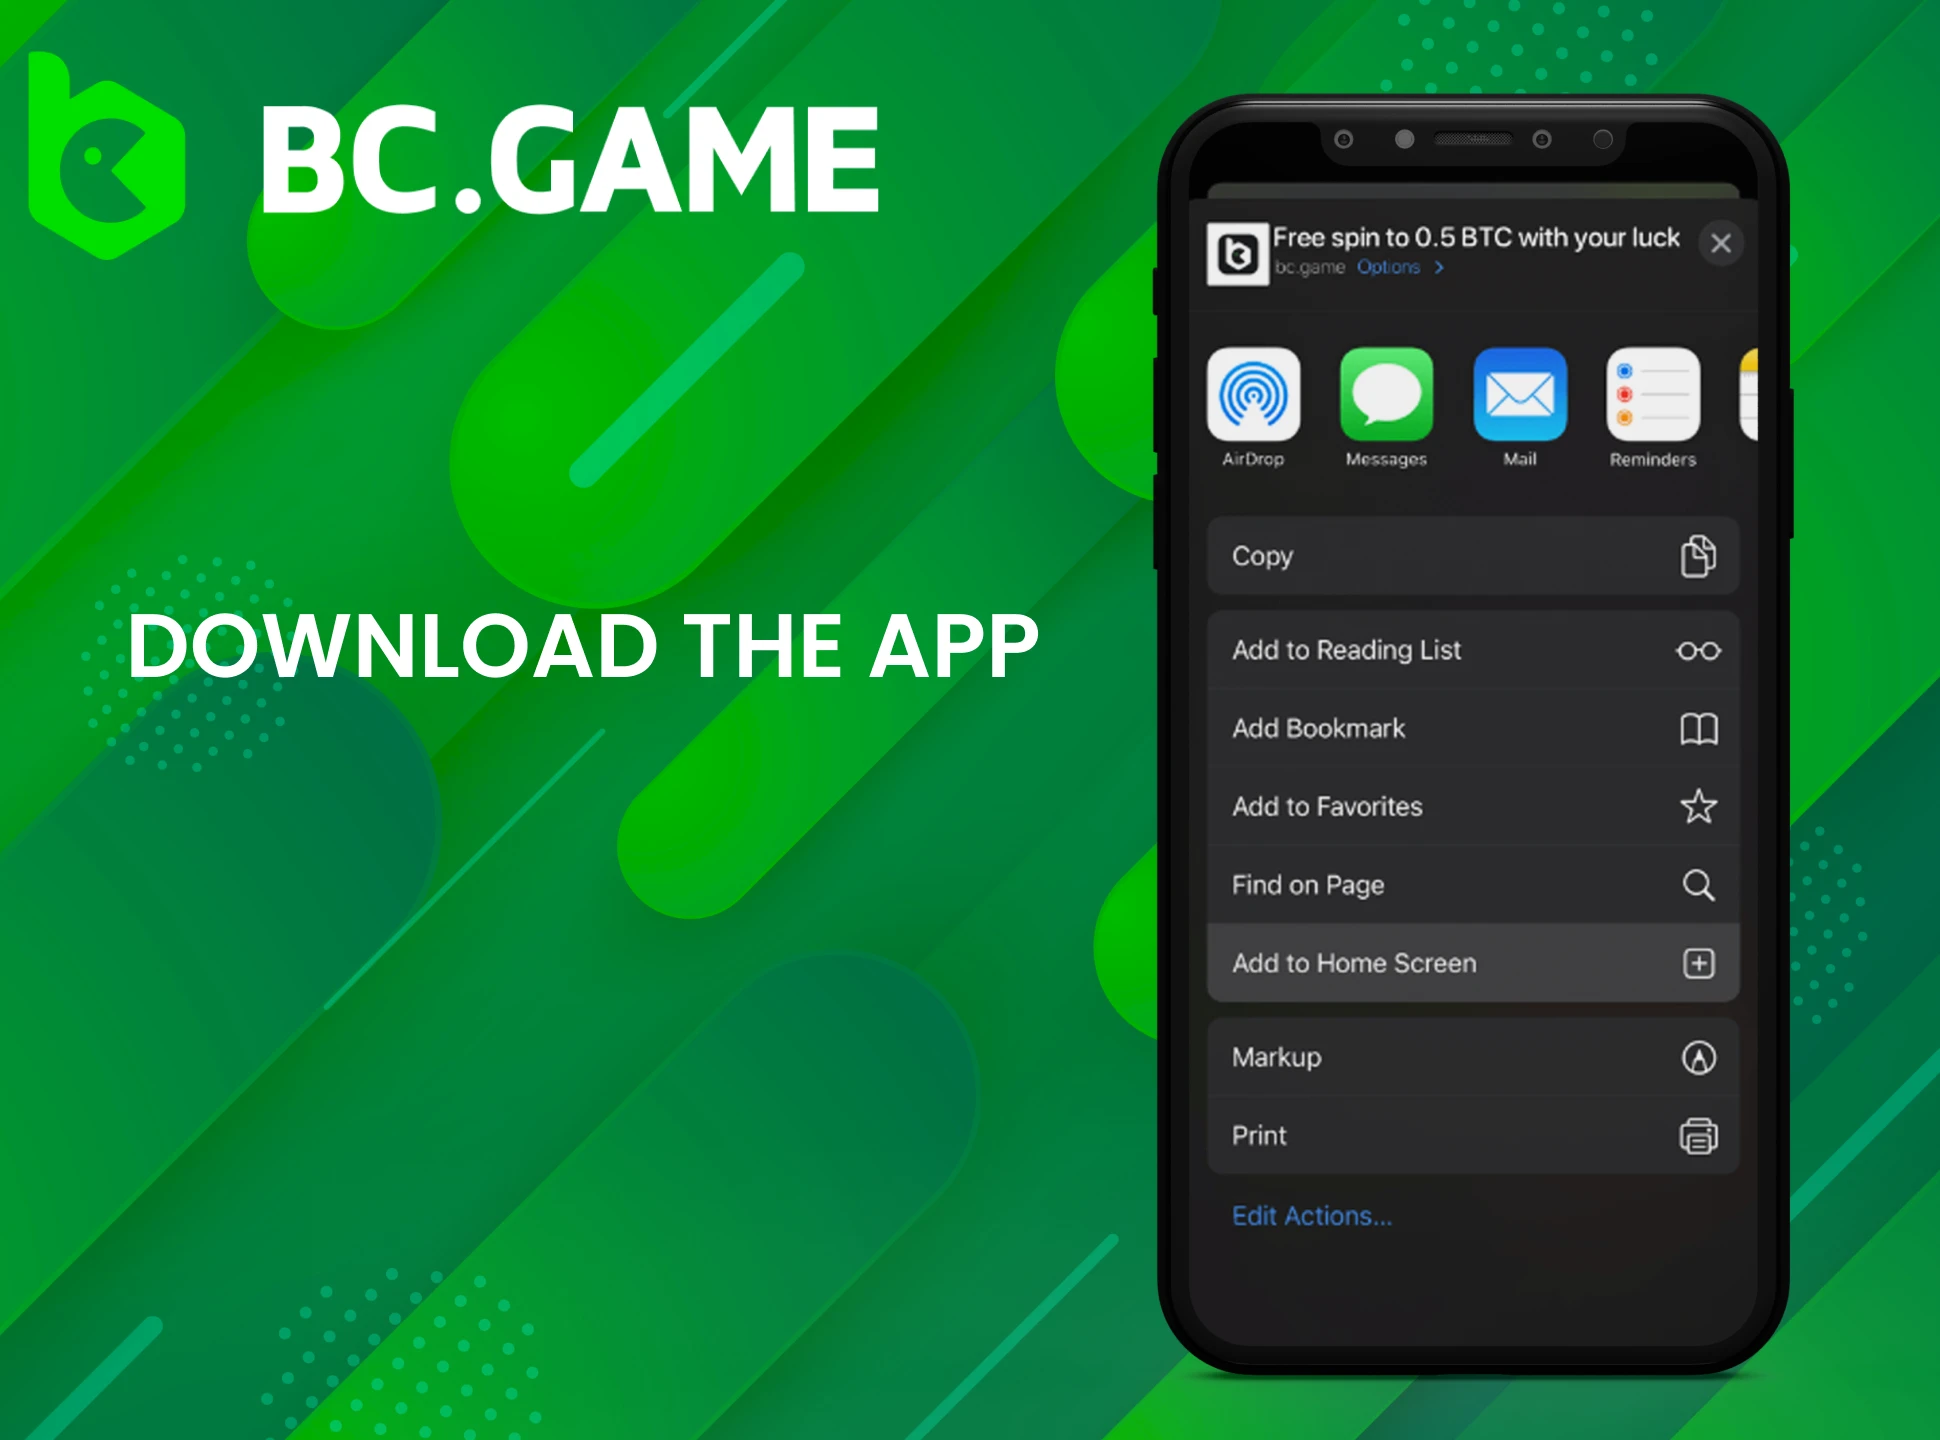 Download the BC Game app on your iOS device in minutes.